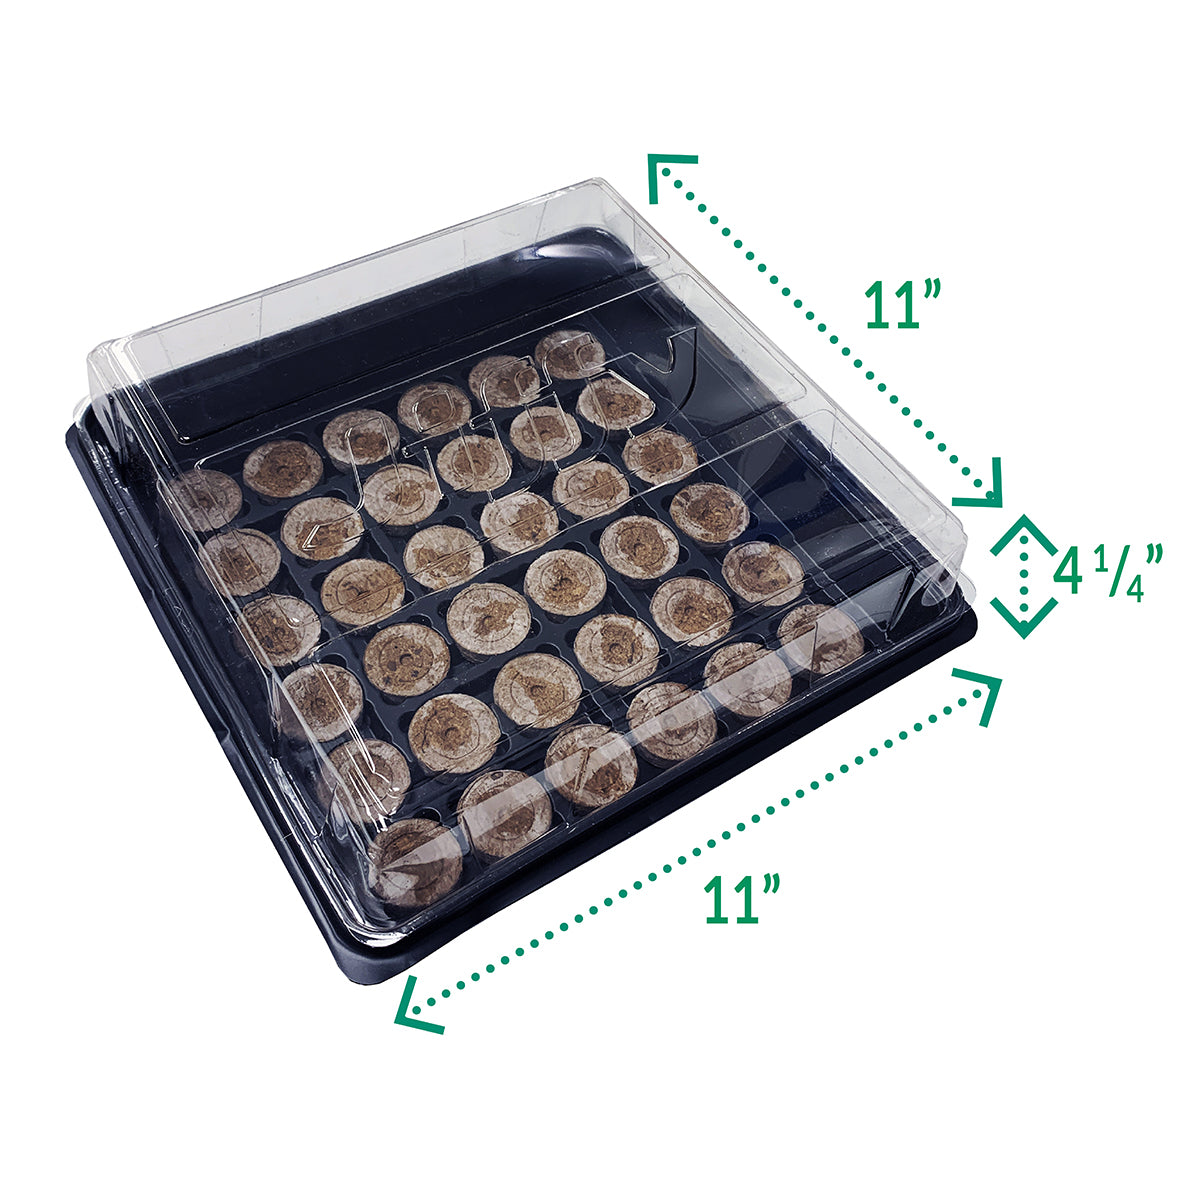 Jiffy 36mm Seed Starting Greenhouse Kit with 36 Plant-based Expanding Peat Pellets + Bonus SUPERthrive & Plant Labels